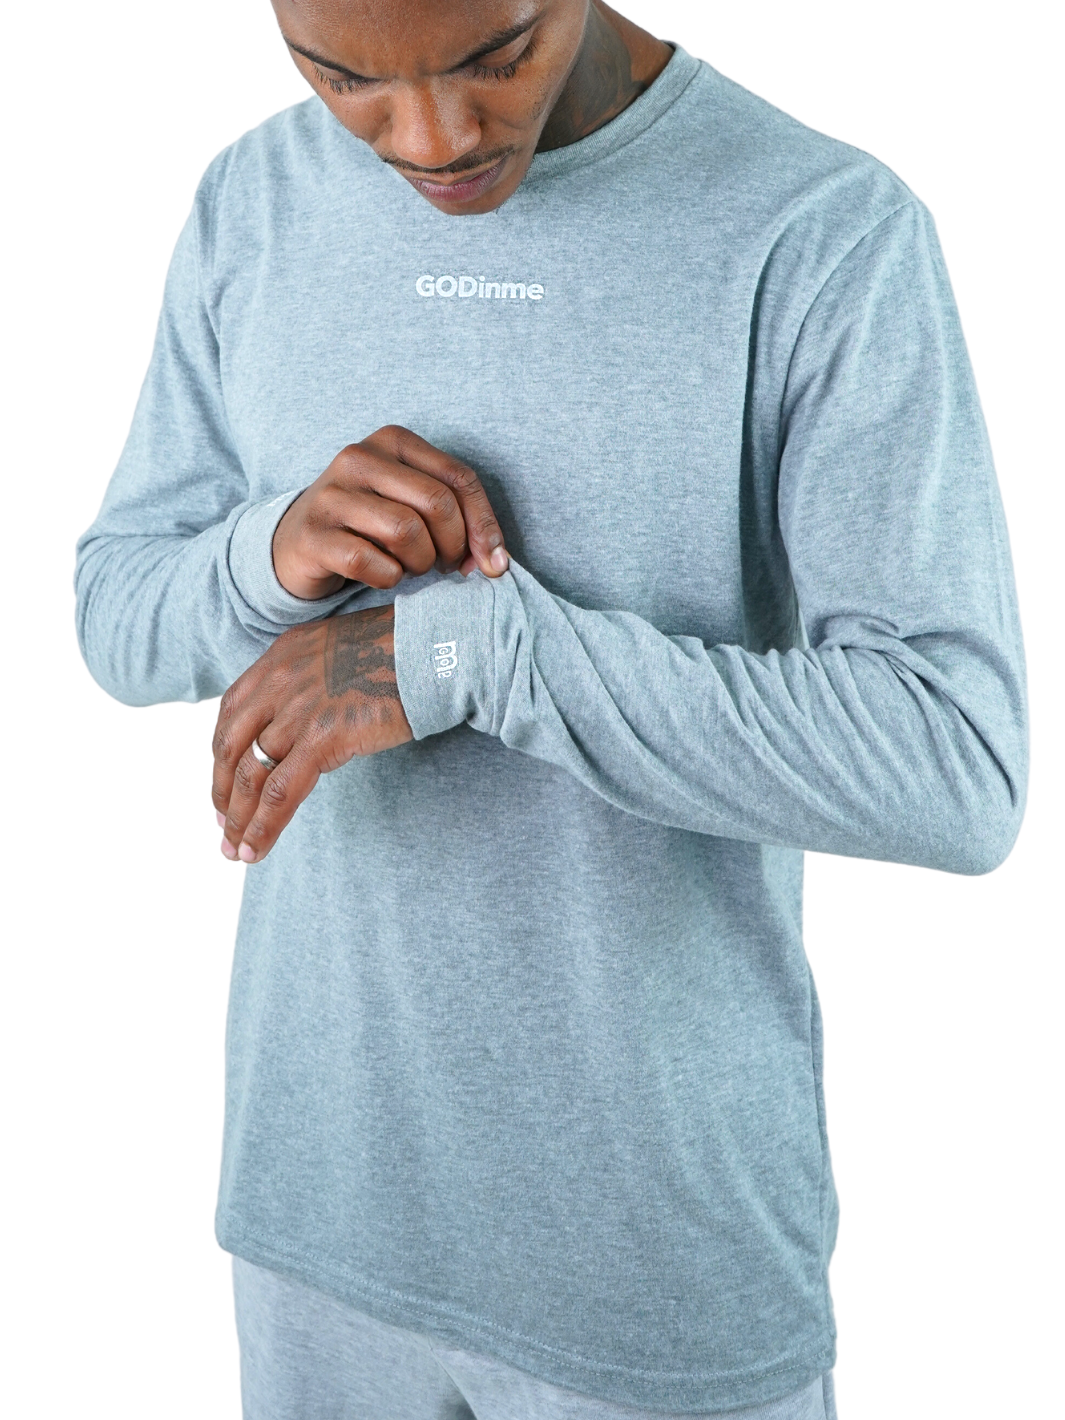 Made to feel like sueded peach fuzz, this Grey long sleeve shirt offers unbeatable comfort. The GODinme printed on front chest and the logo on sleeve cuffs and upper back represent boldness and style.